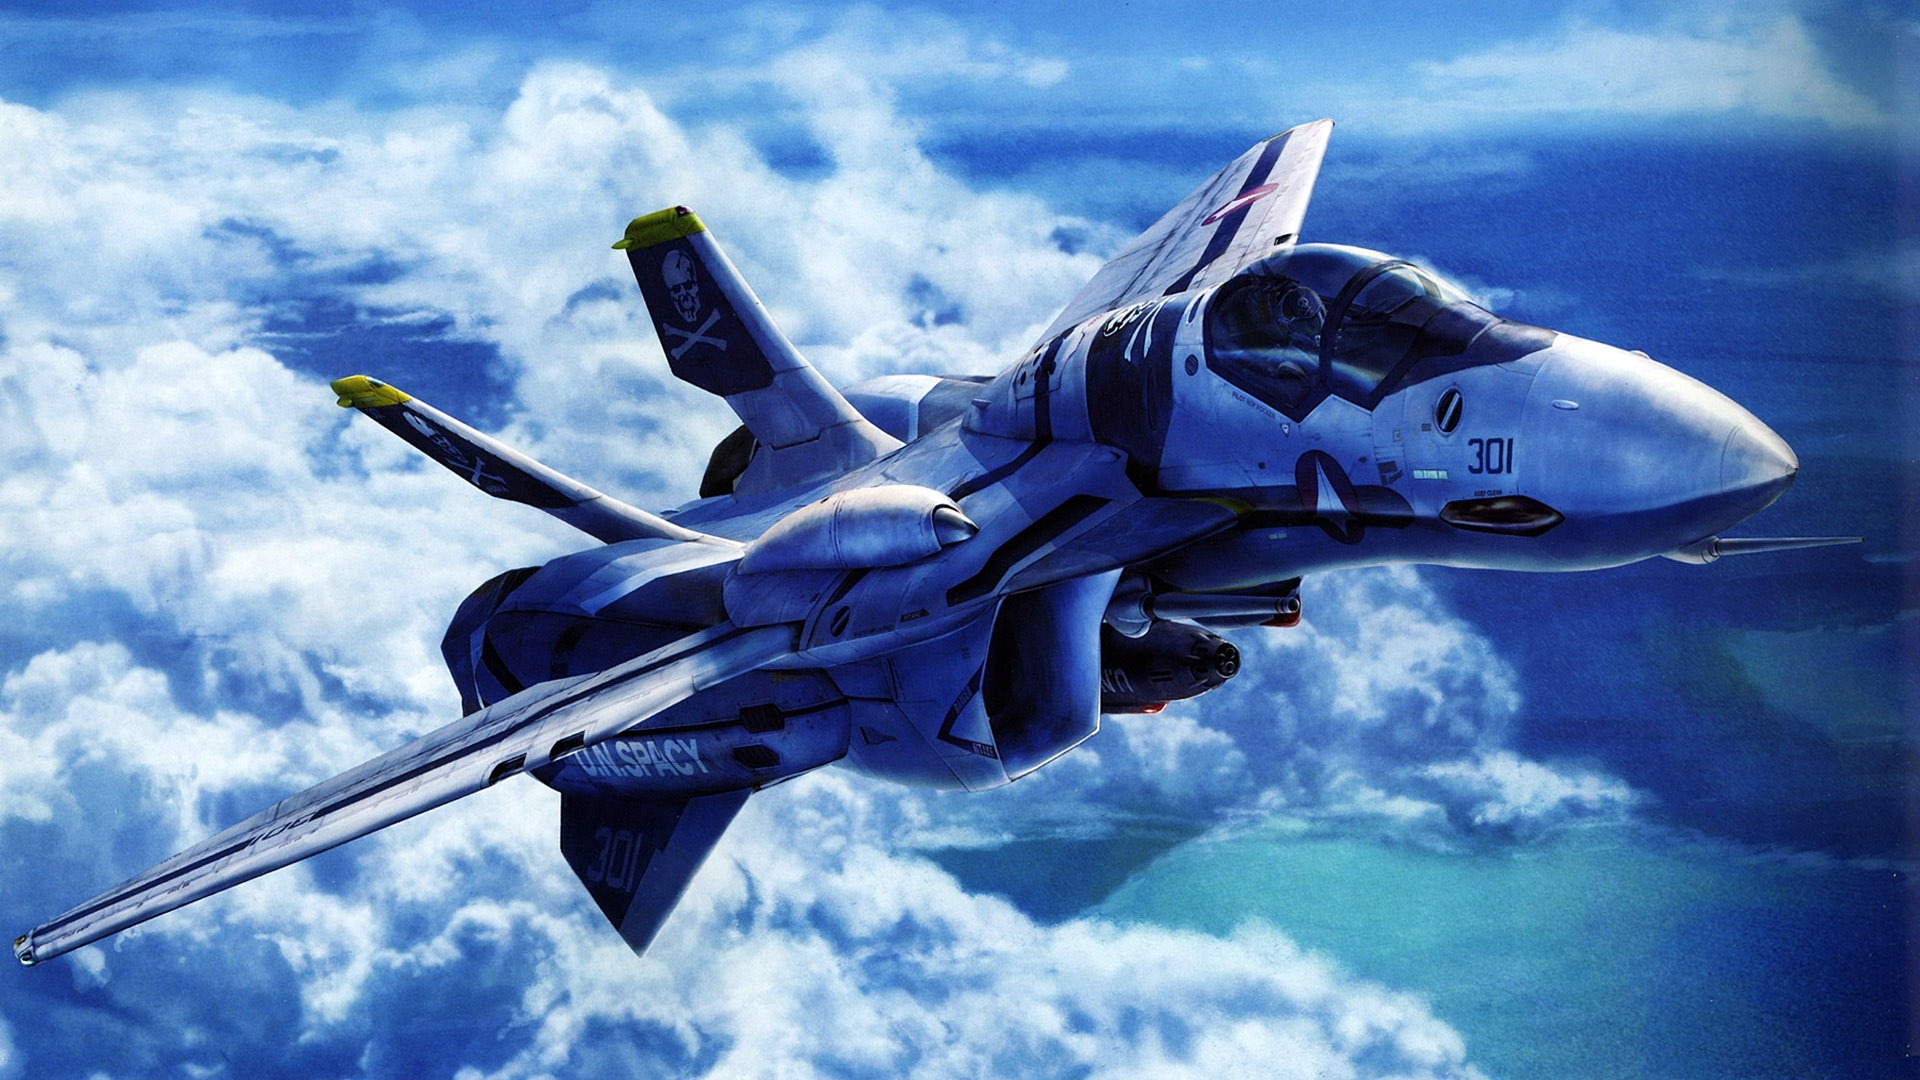 best-fighter-airplane-wallpapers-hd | wallpapers55.com - Best ...